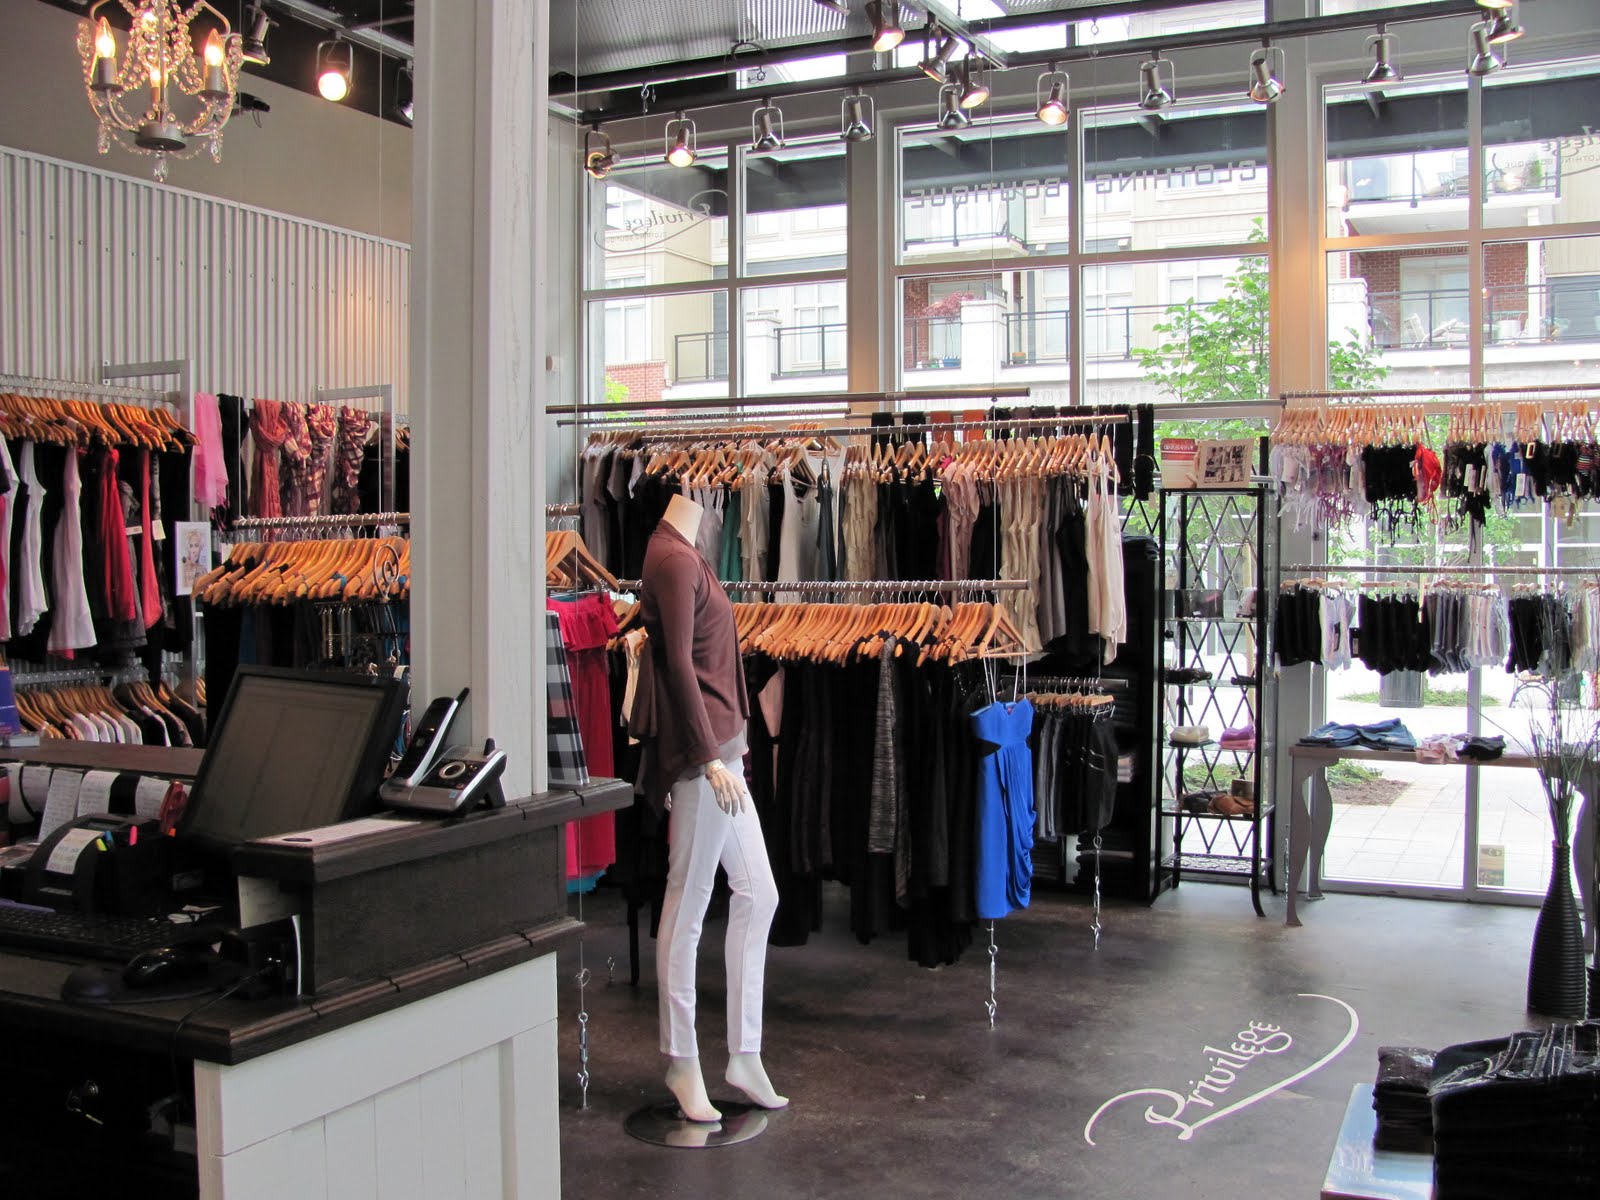 Download this Clothing Boutique One Absolute Favorite Contemporary Shopping picture